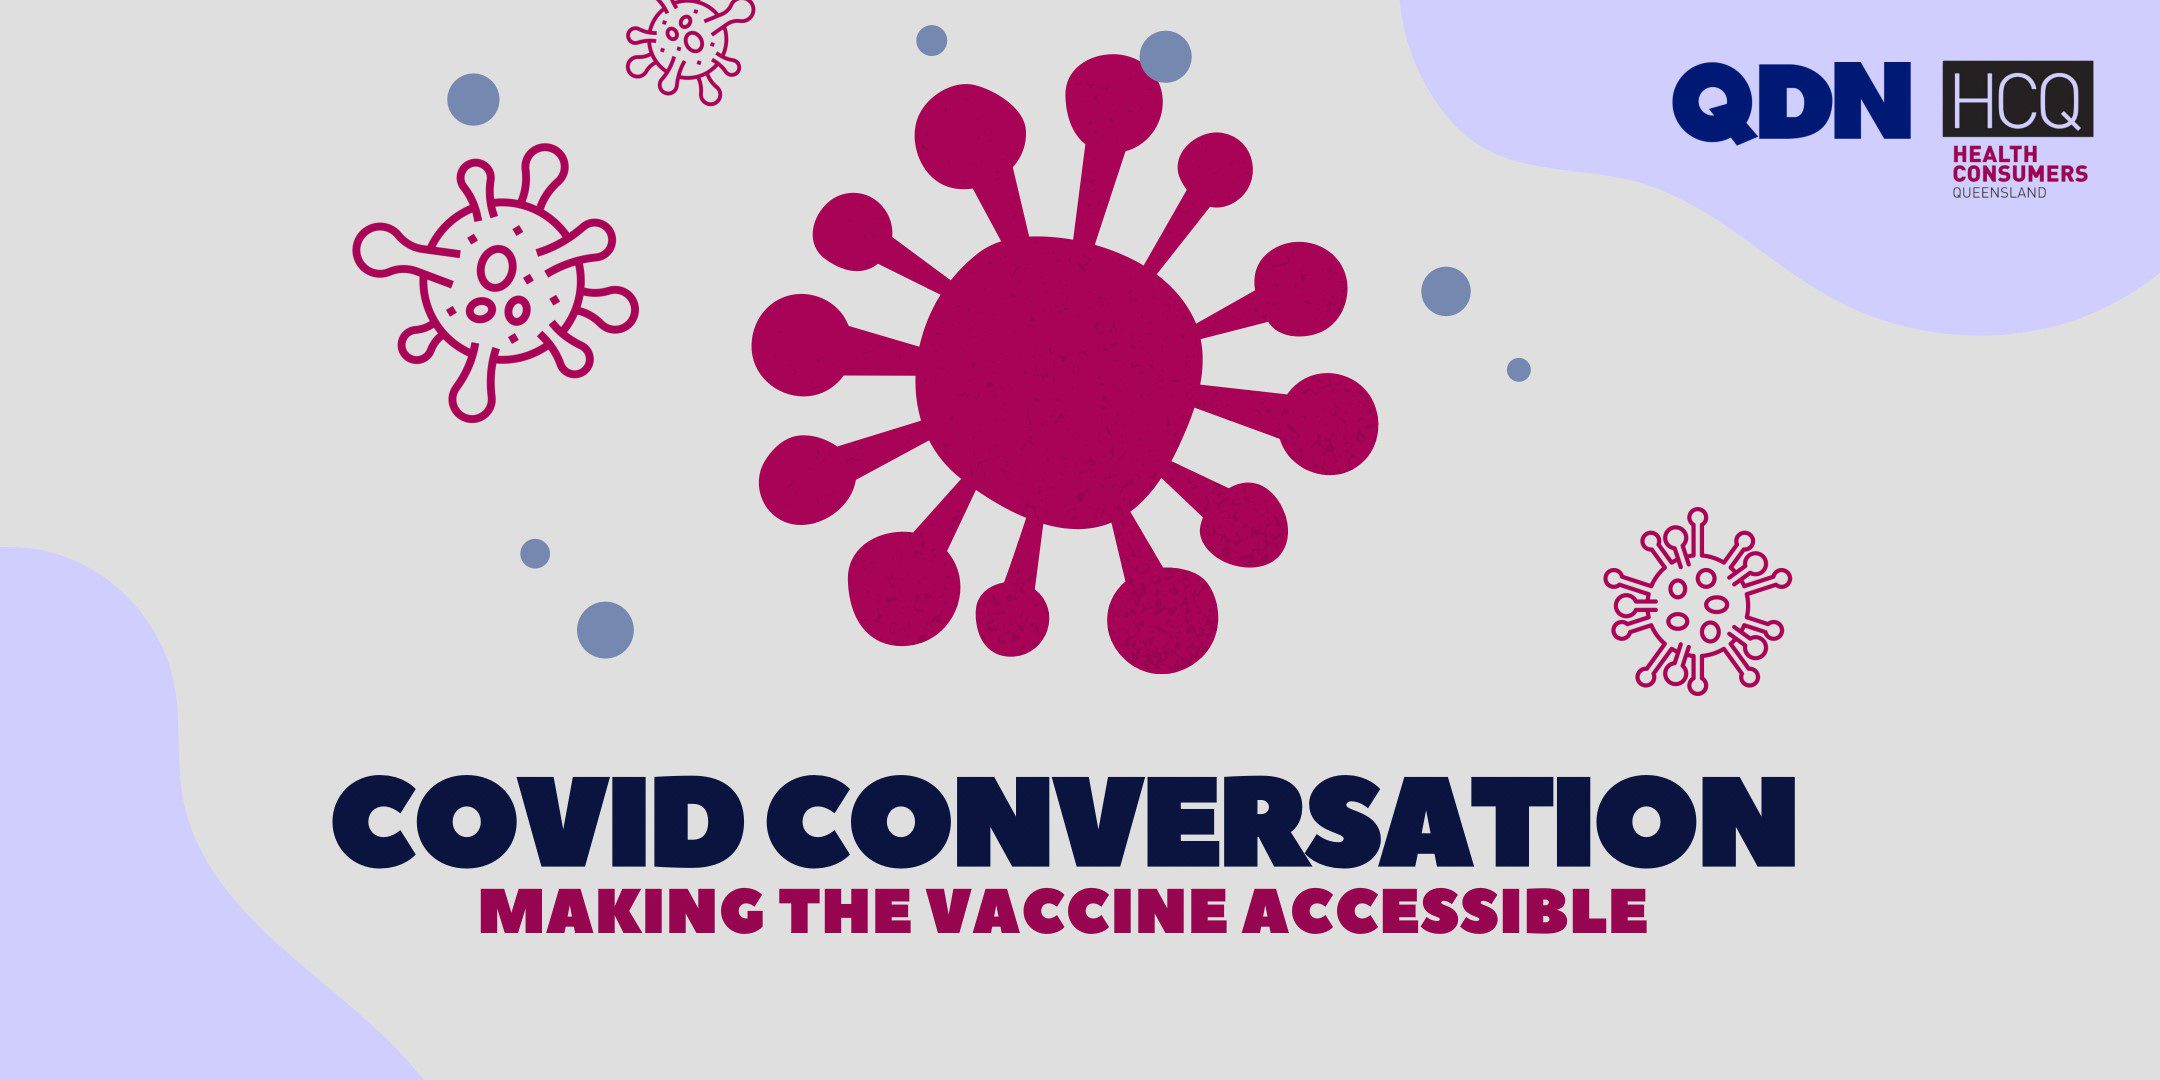 A light purple and grey spot background has a large pink molecule in the center and three smaller pink outlined molecules. The words Covid Conversations, making the vaccine accessible are at the bottom.